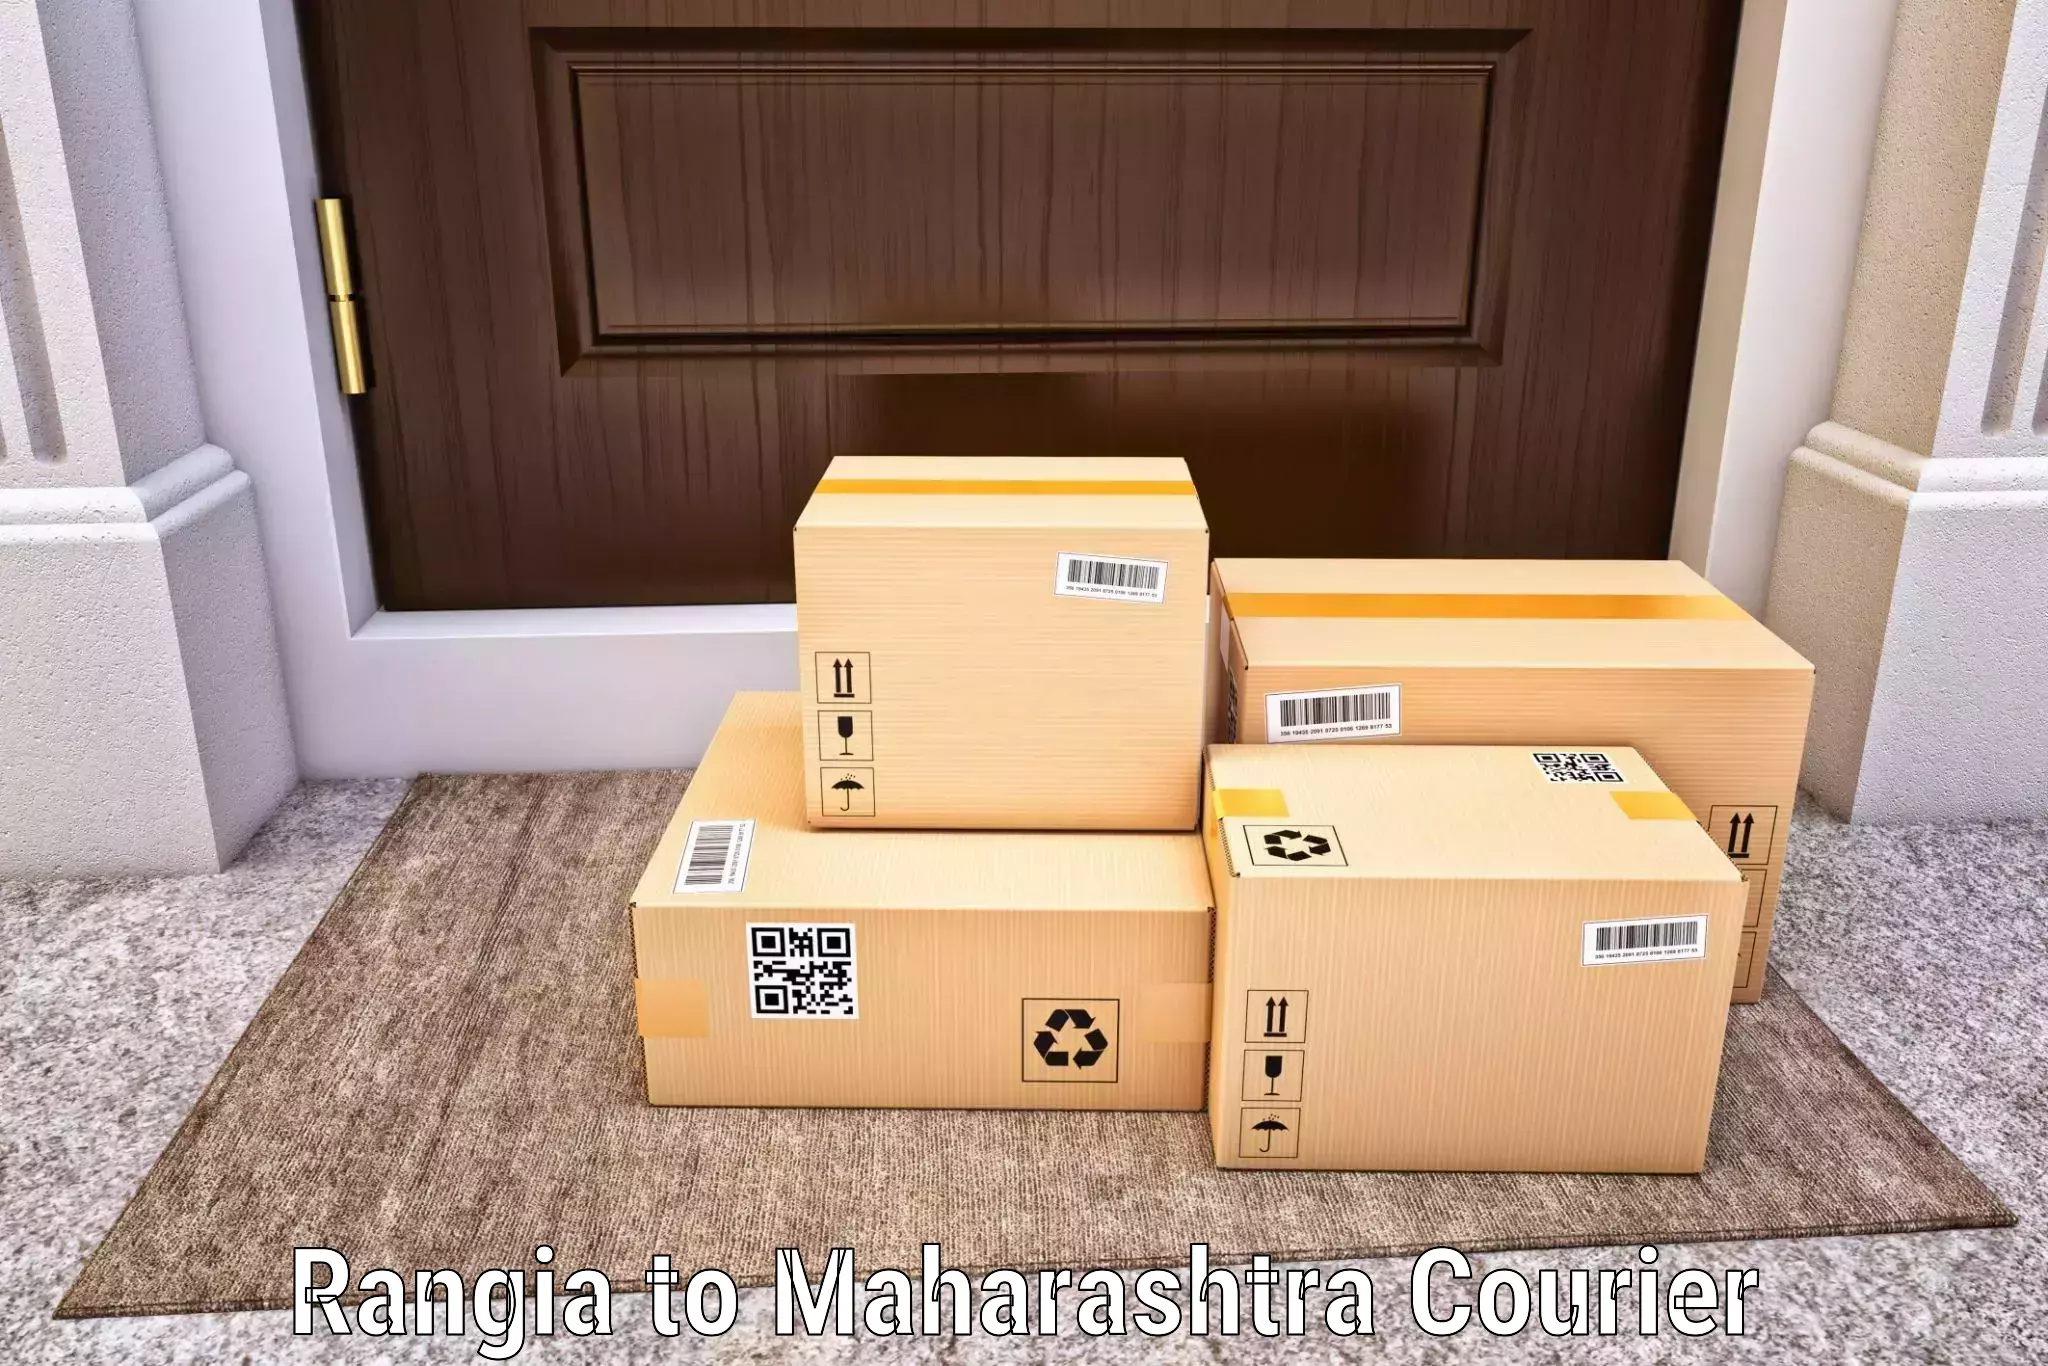 Parcel service for businesses in Rangia to Thane